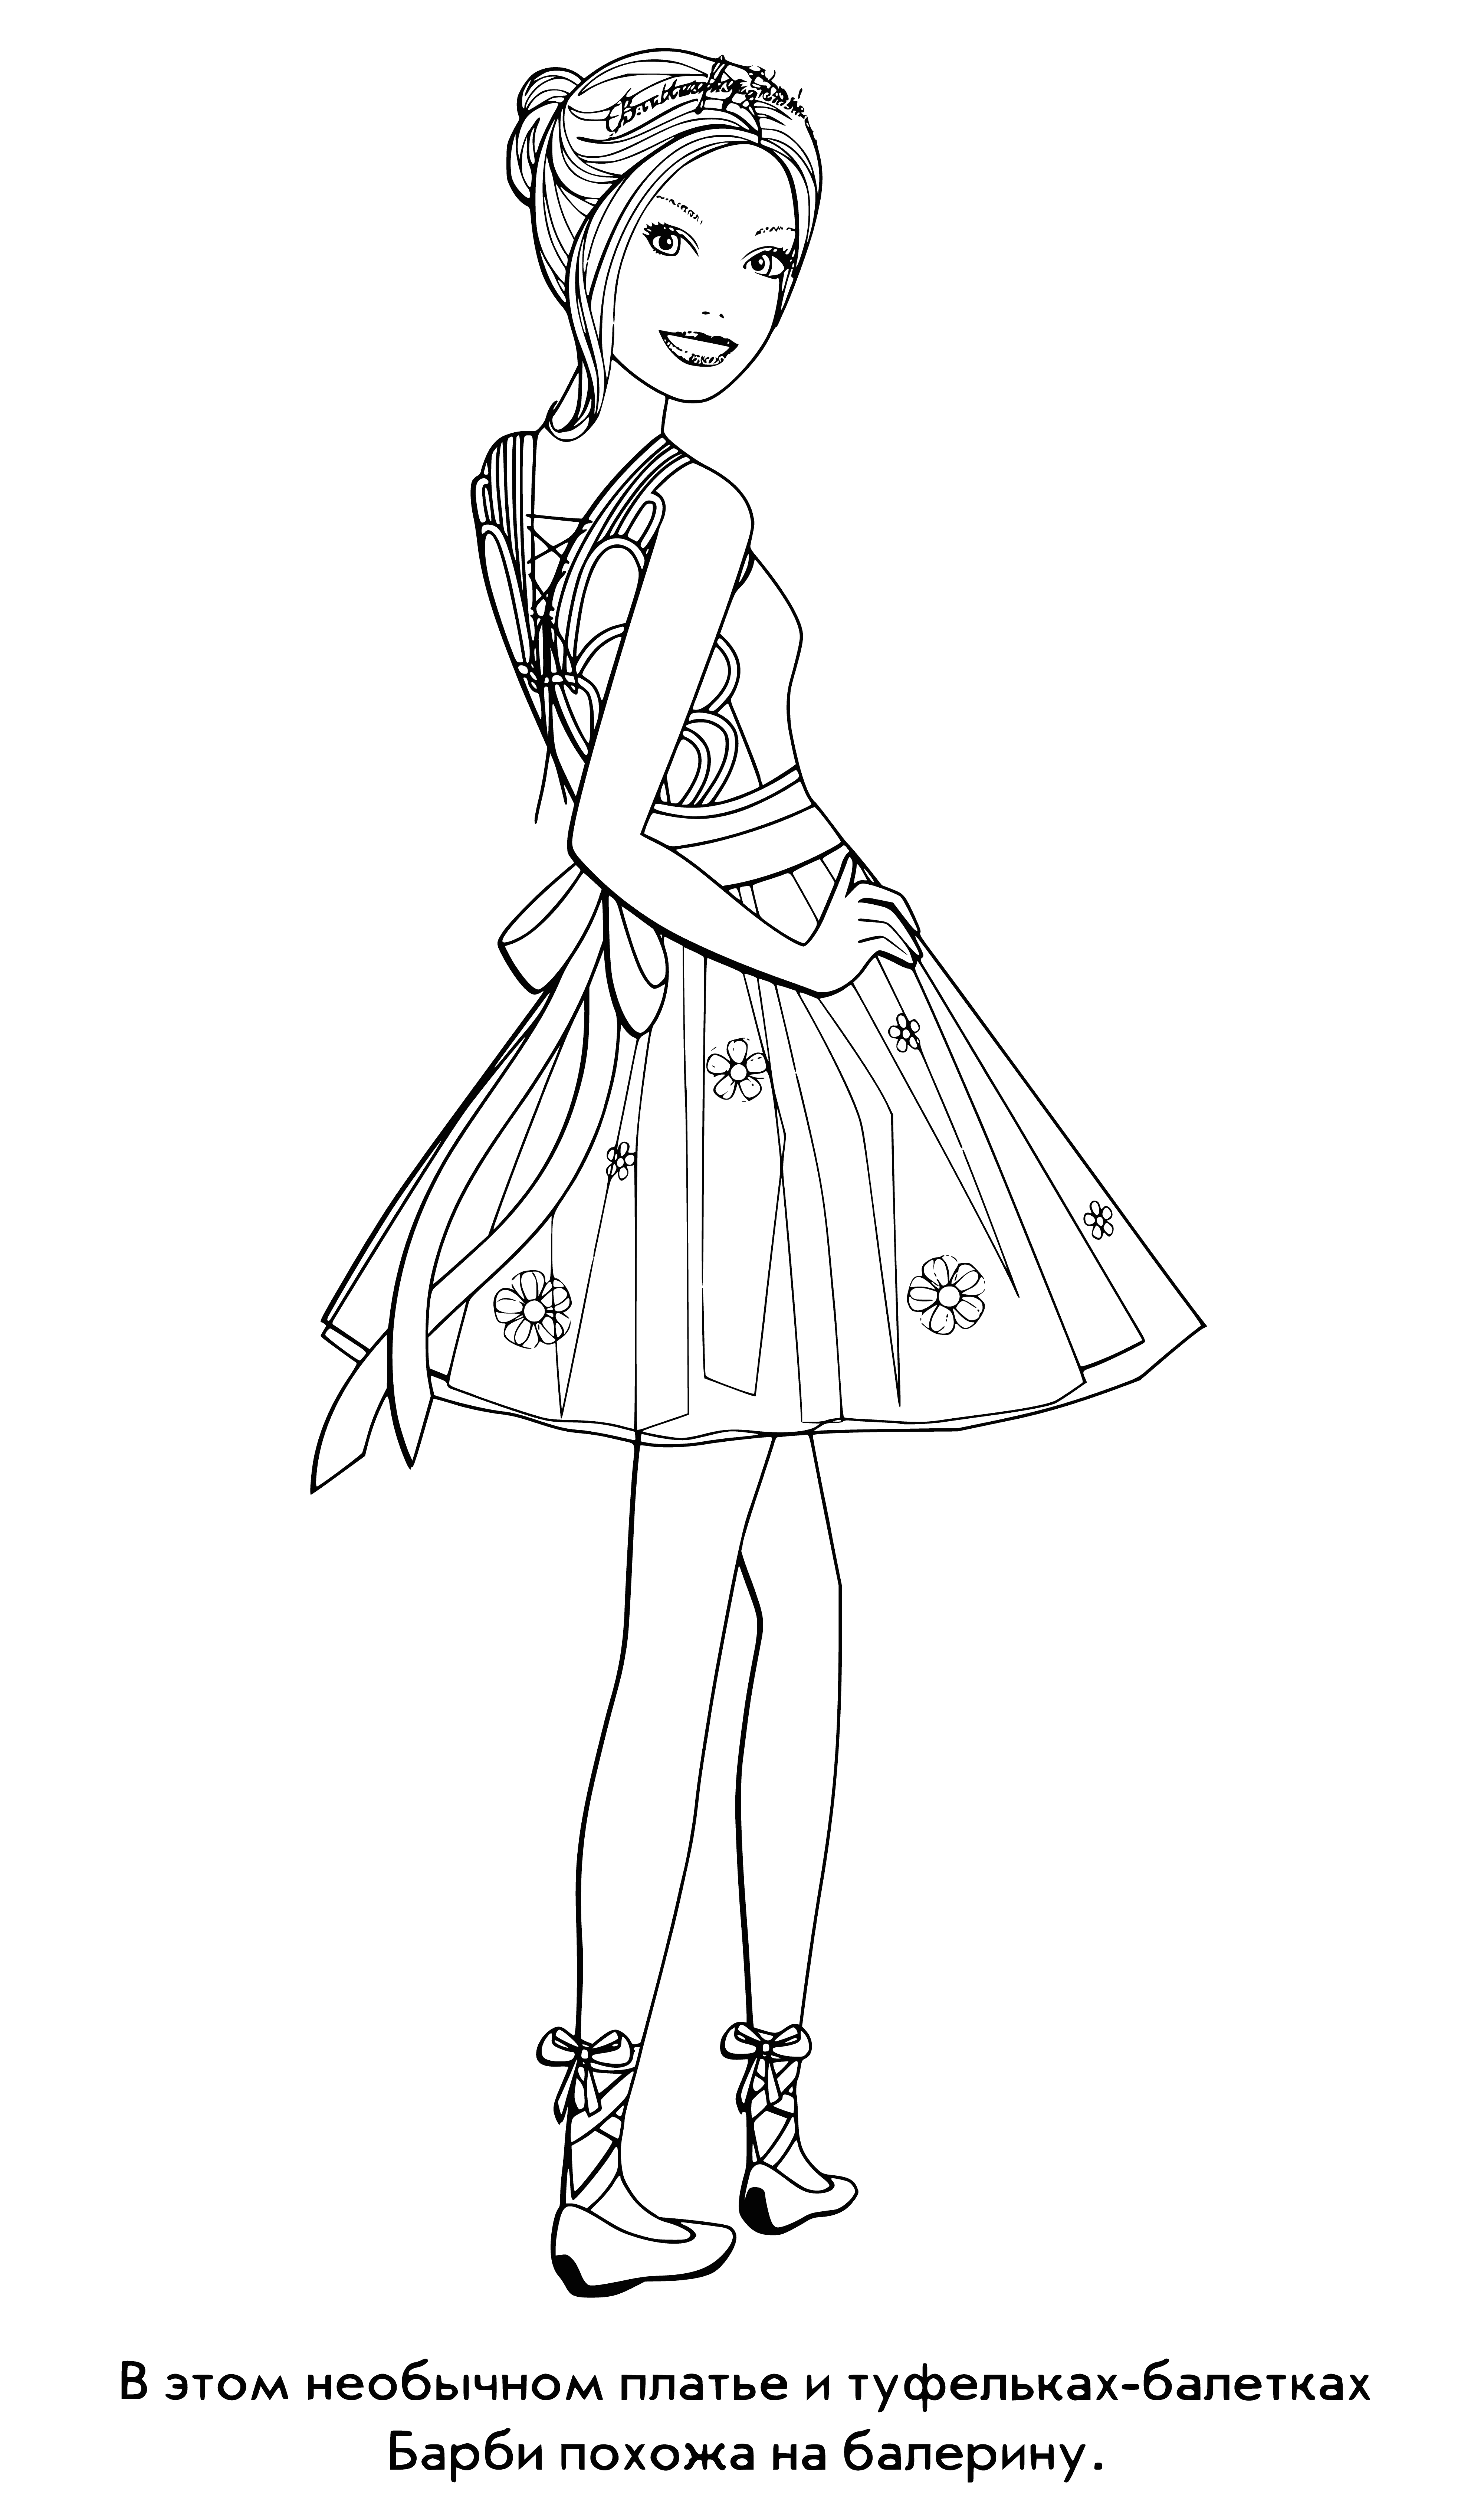 coloring page: Fashionable Barbie doll in an updo with a strapless shiny pink dress and sparkly accessories. High heels complete the look. #Barbie